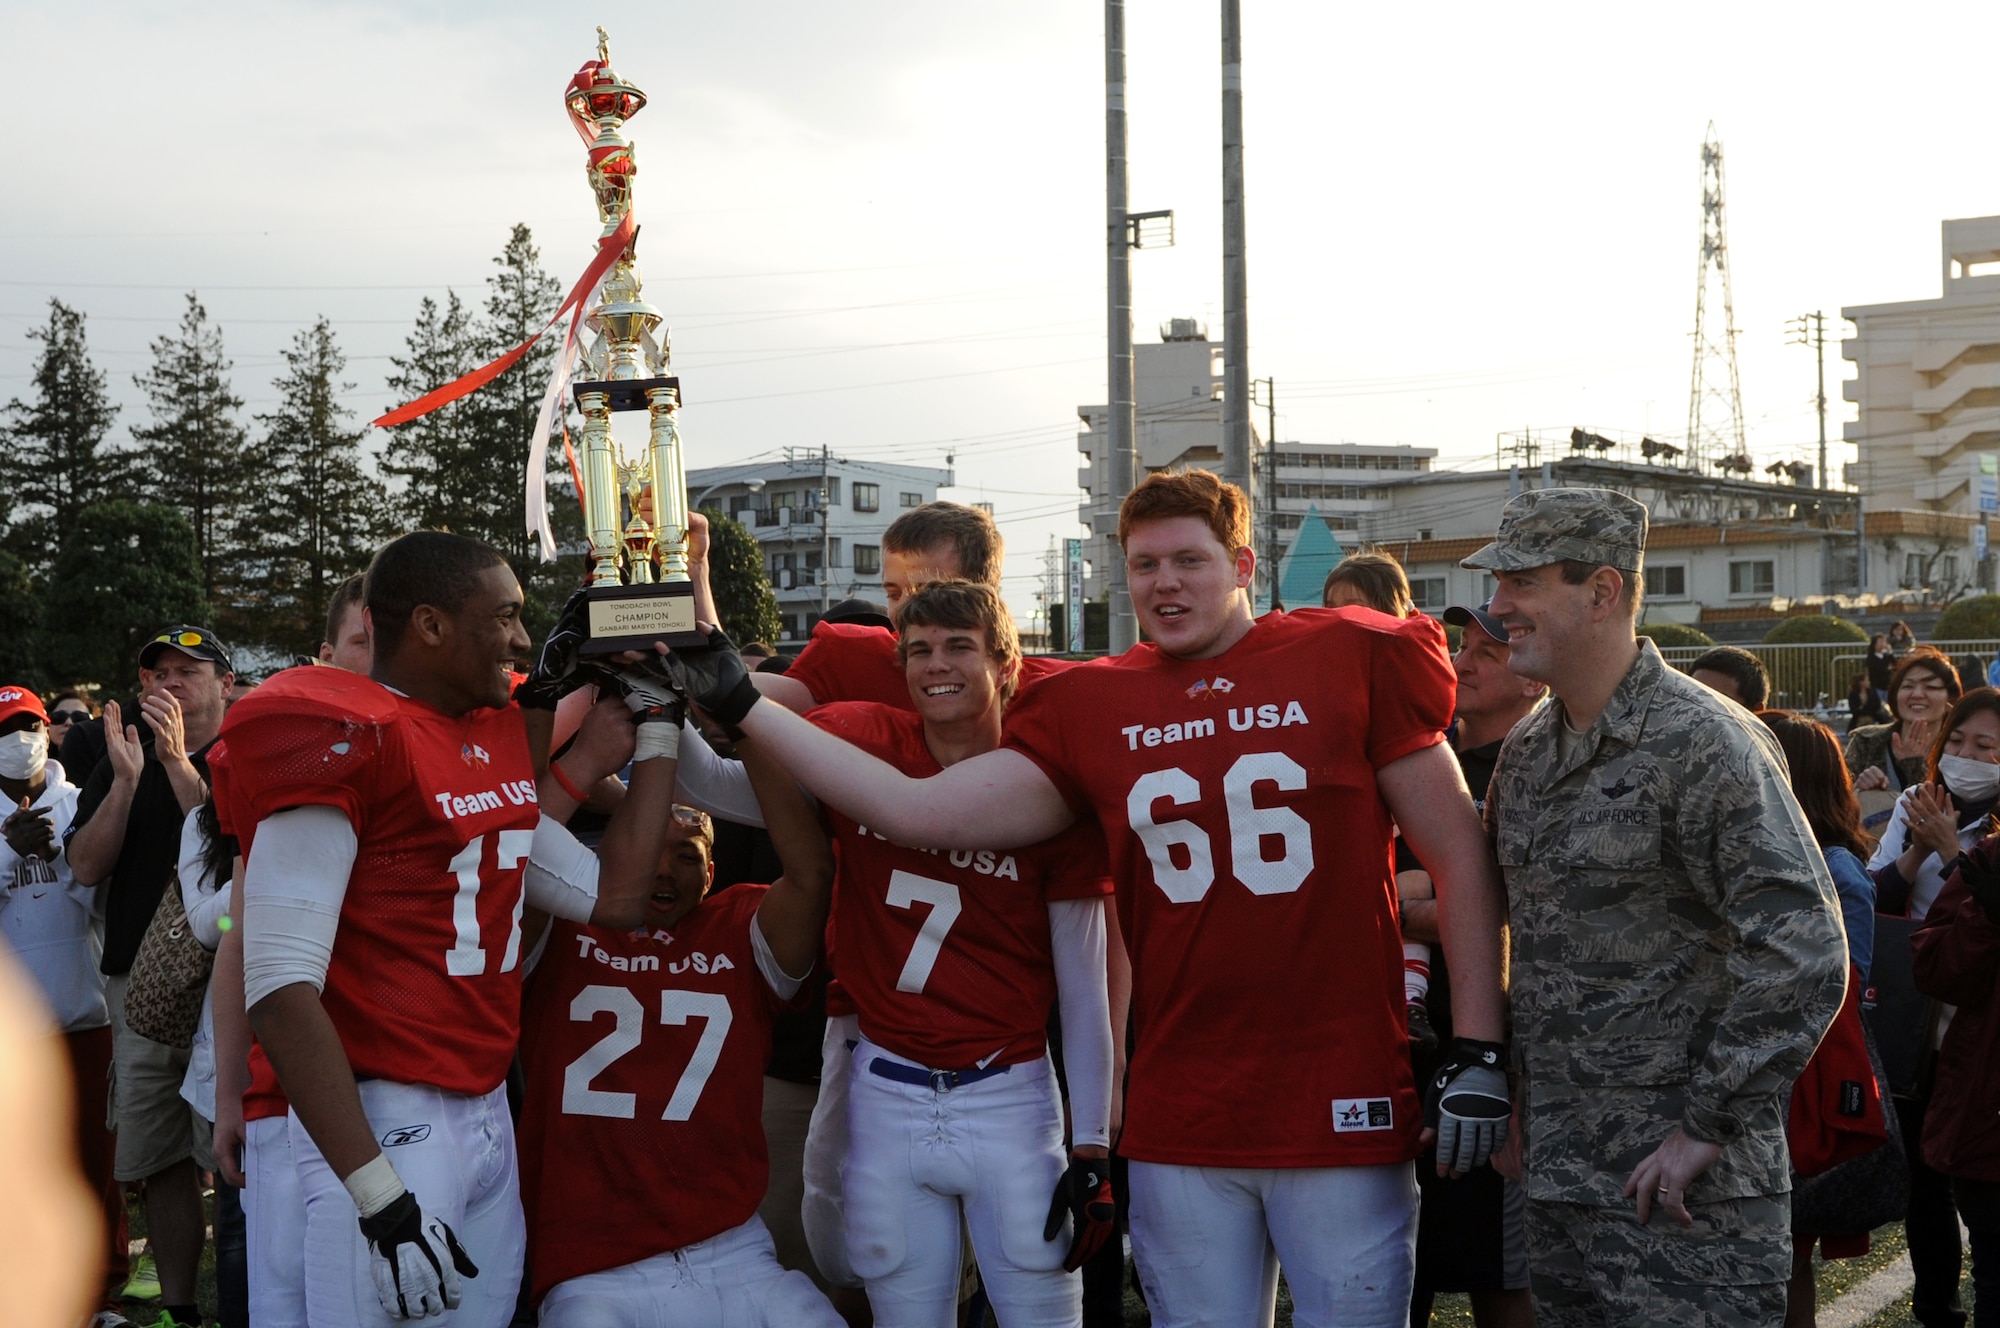 YOKOTA AIR BASE, Japan -- Team USA captains hold up their trophy with Col. Mark August, 374th Airlift Wing commander, following the 2013 Tomodachi Bowl March 10, 2013, at Yokota Air Base, Japan. Team USA won the second annual bowl game 57 - 21. (U.S. Air Force photo by Airman 1st Class Desiree Economides)